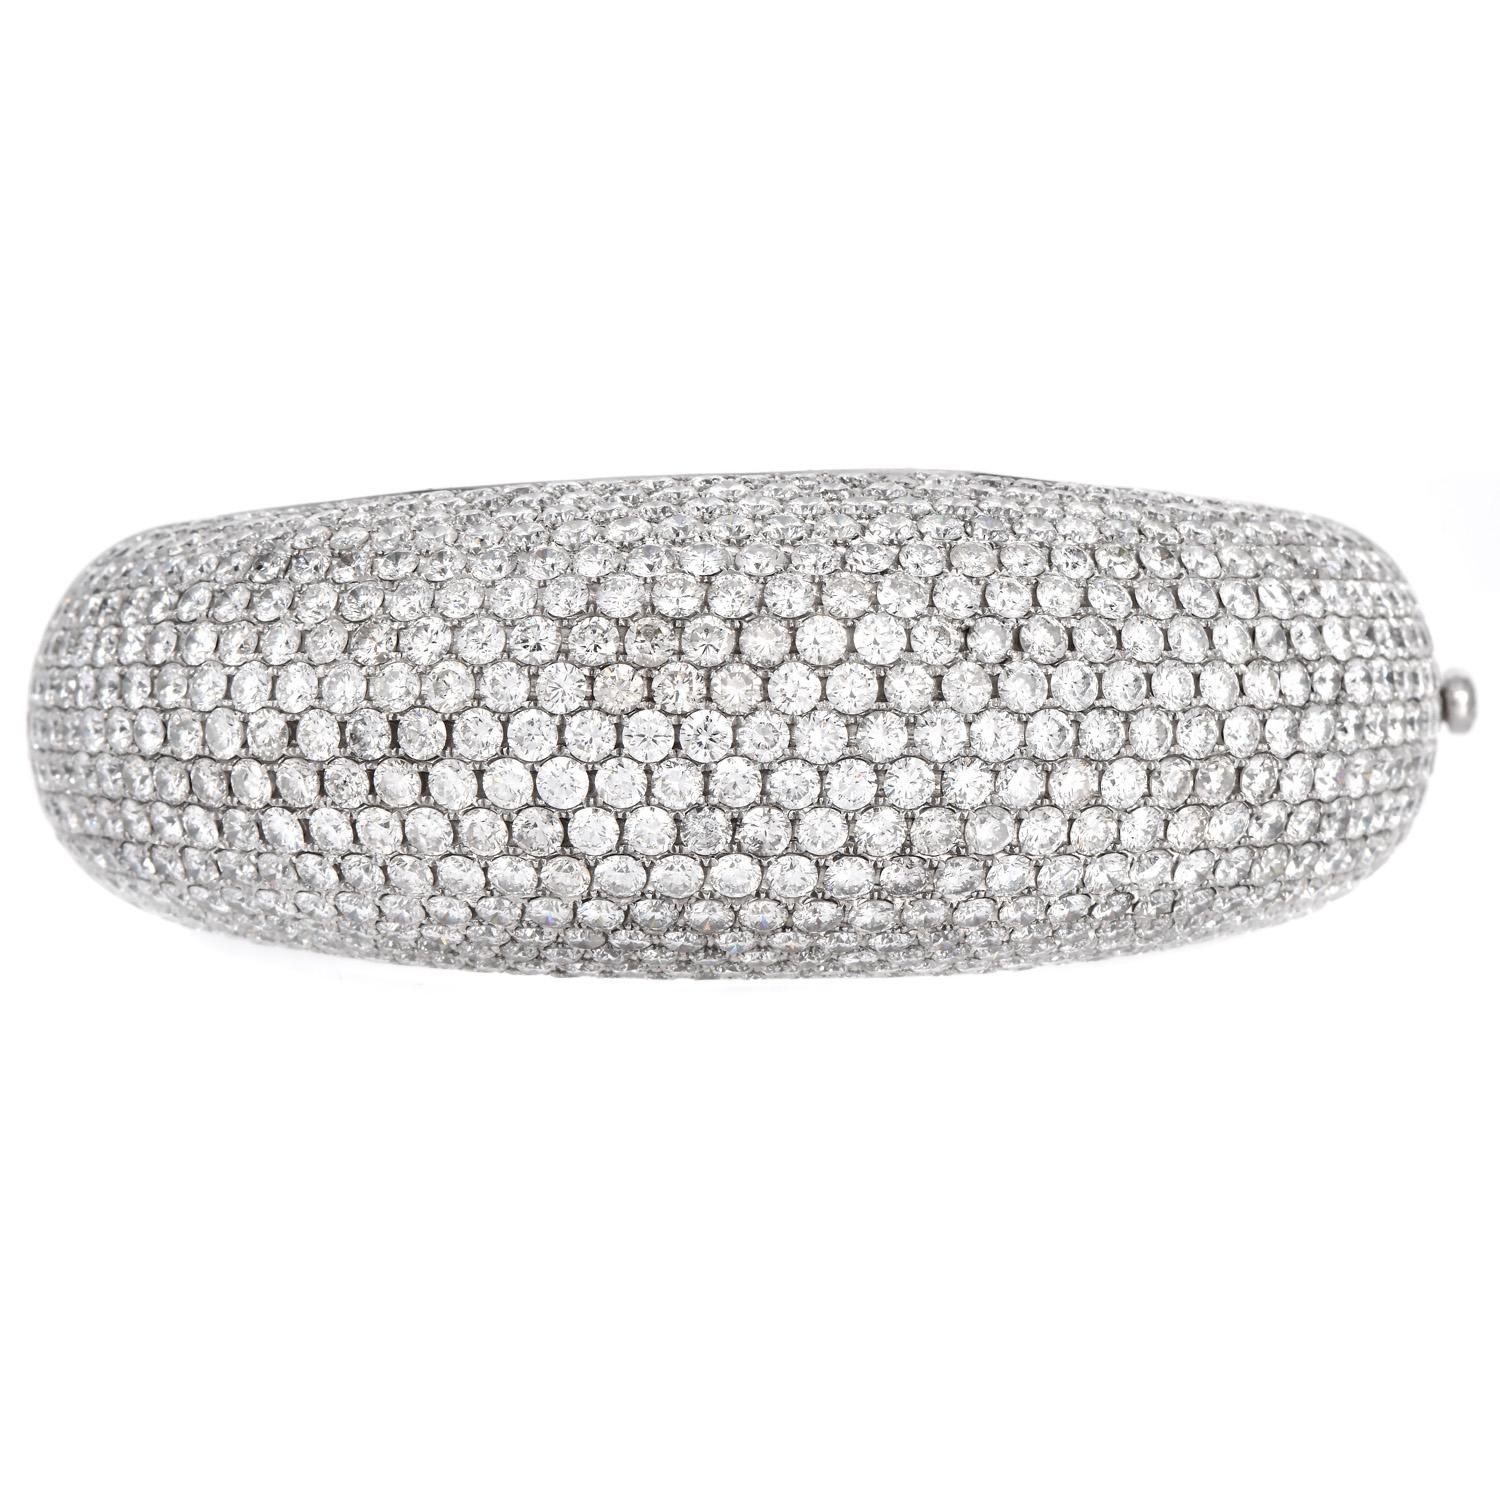 Presenting a Wide Dome Statement Diamond Bangle Bracelet. Prong and Pave set natural Diamonds in line form made in solid 18K White Gold secured with Insert Clasp. Graduating from 15mm wide to 25mm wide bangle. Decorated stunningly with over 568